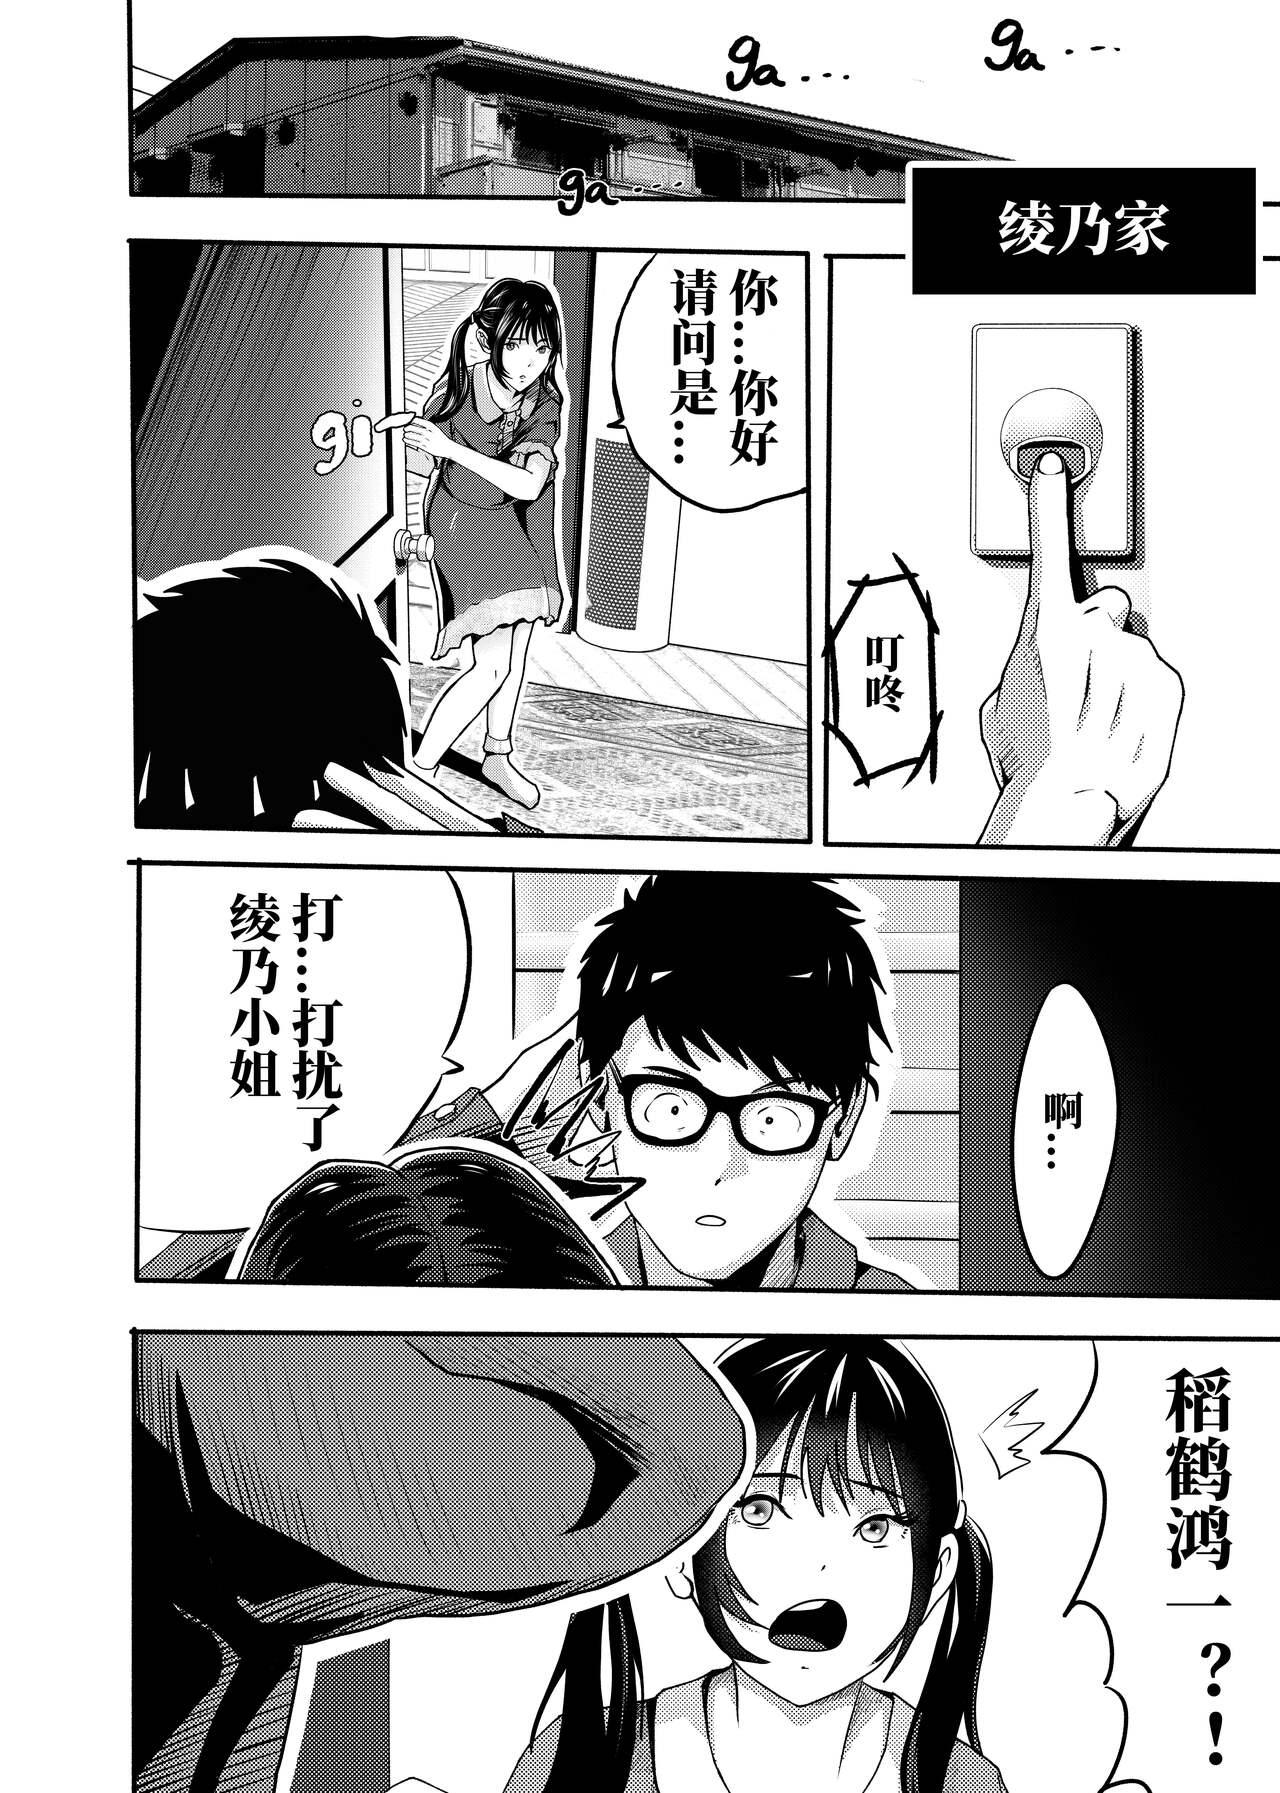 [KAO.YELLOW STUDIO (T.C.X)] I must be out of my mind to fall in love with SAORI, the Snuff Queen Ch.1-16 | 想与冰恋女王纱织同学谈恋爱的我脑子一定有问题 第1-16话 [Chinese] 246